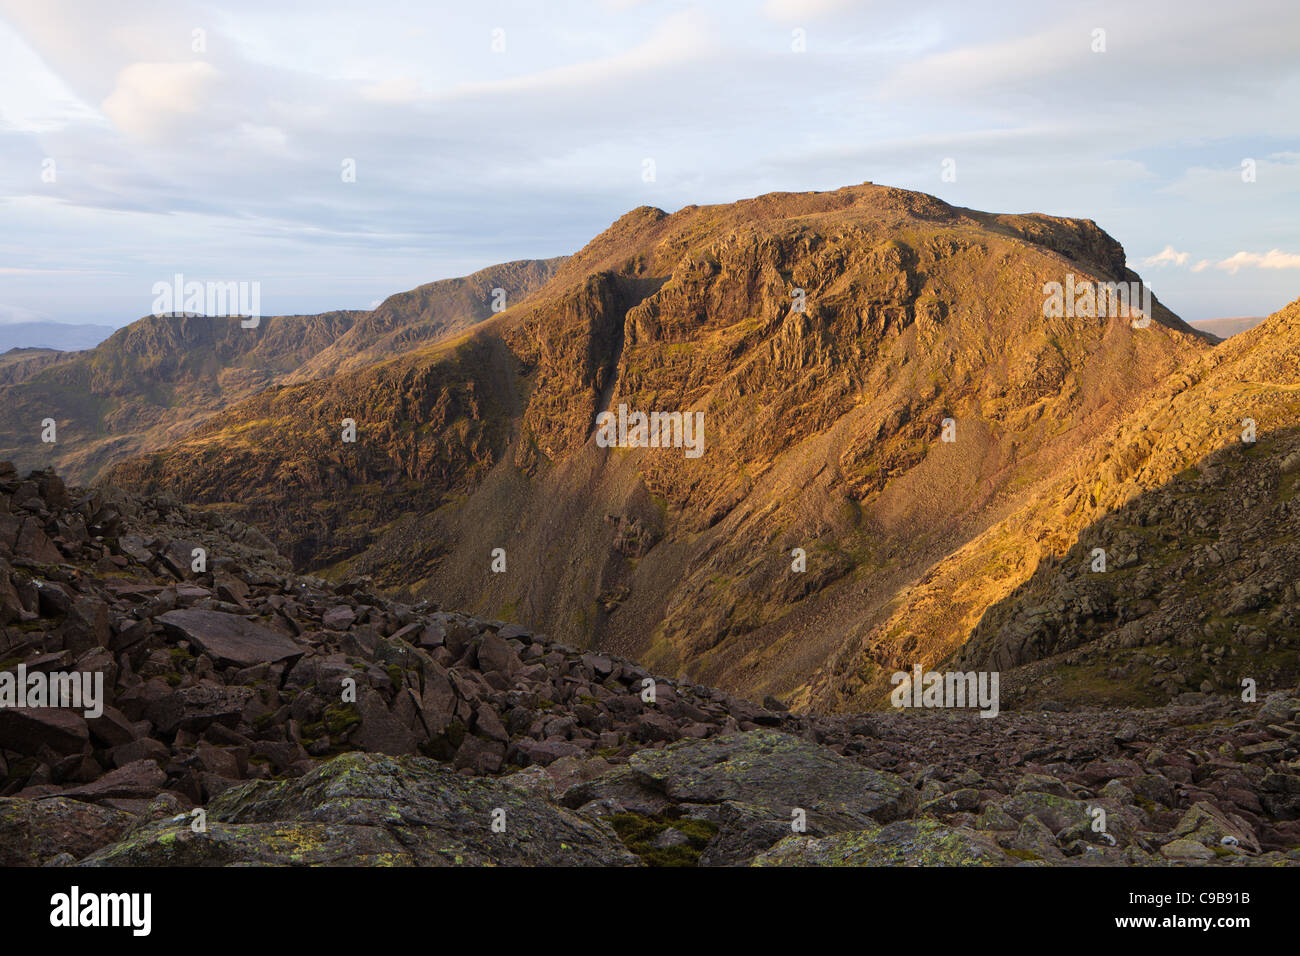 Scafell Pike, English Lake District, England's highest mountain. Viewed from Ill Crag shortly after sunrise. No people in view. Stock Photo